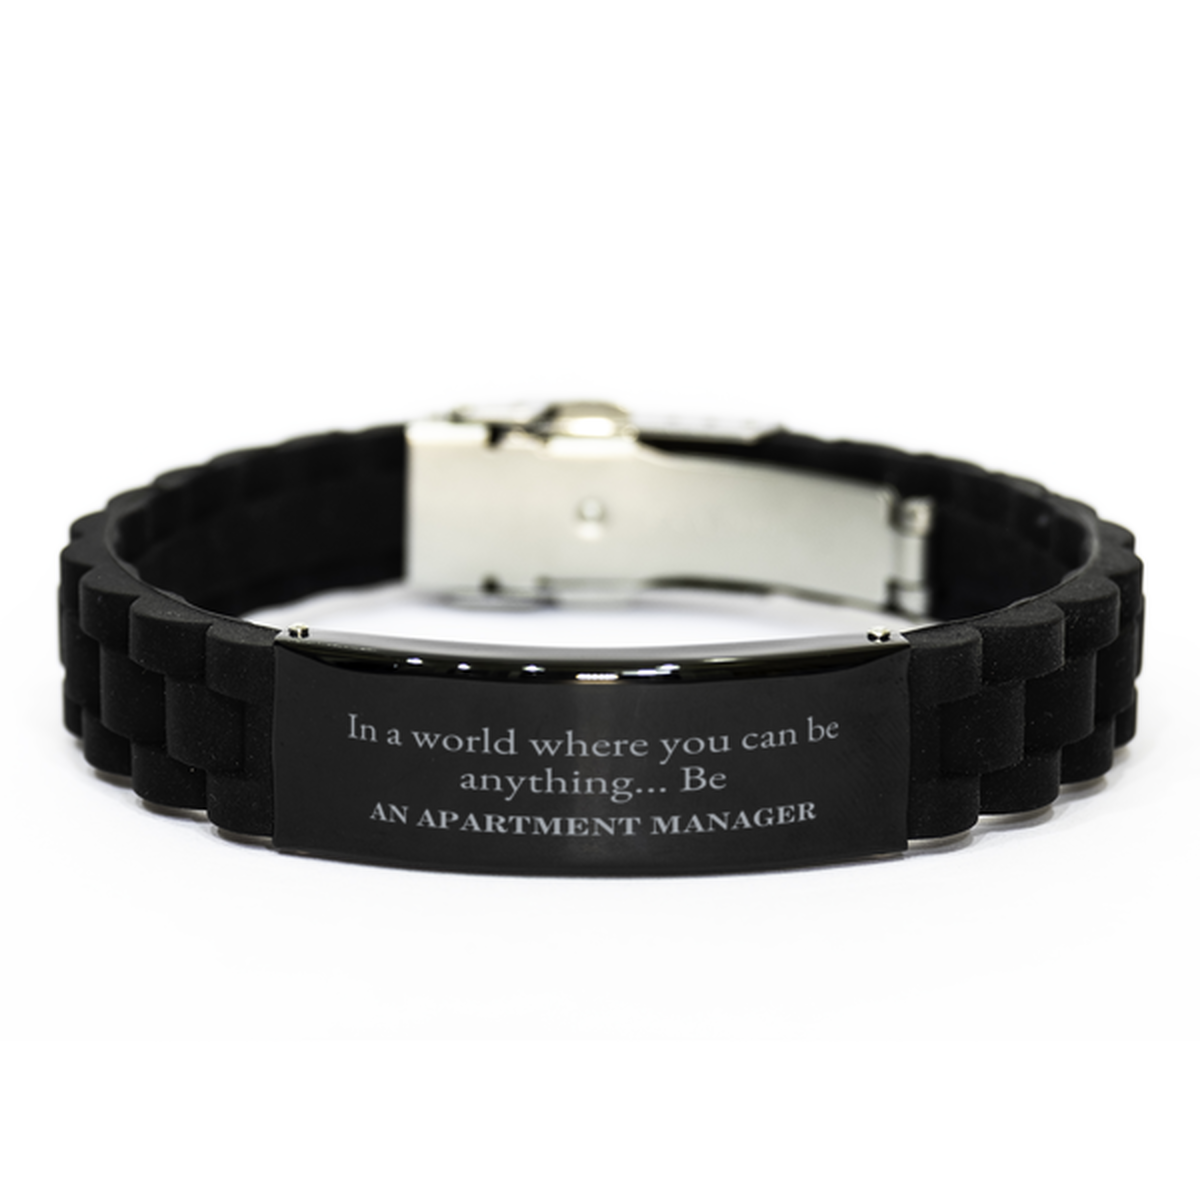 Gifts for Apartment Manager, In a world where you can be anything, Appreciation Birthday Black Glidelock Clasp Bracelet for Men, Women, Friends, Coworkers